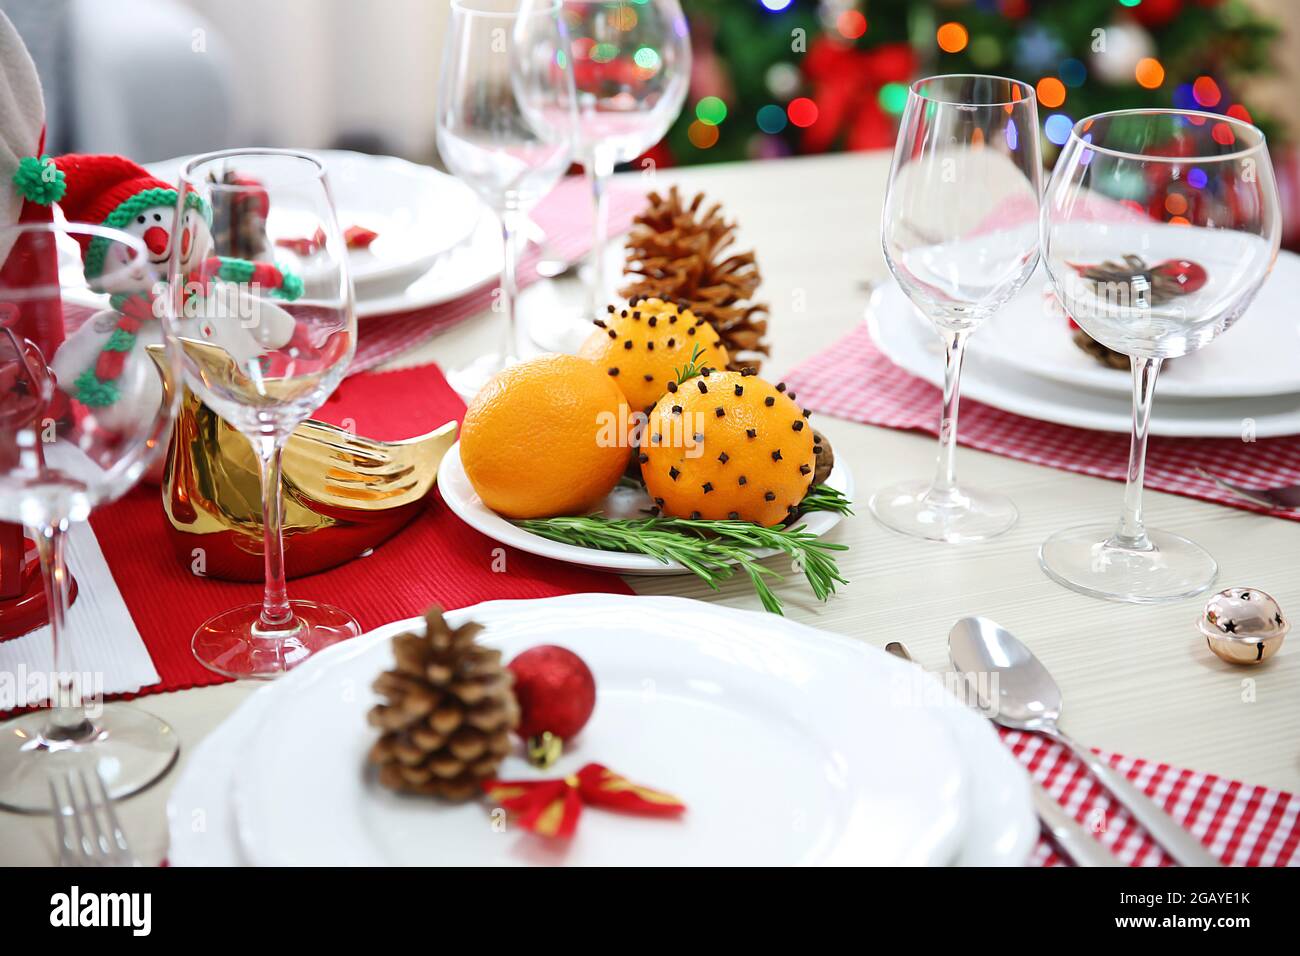 Christmas Table Setting With Holiday Decorations Stock Photo Alamy